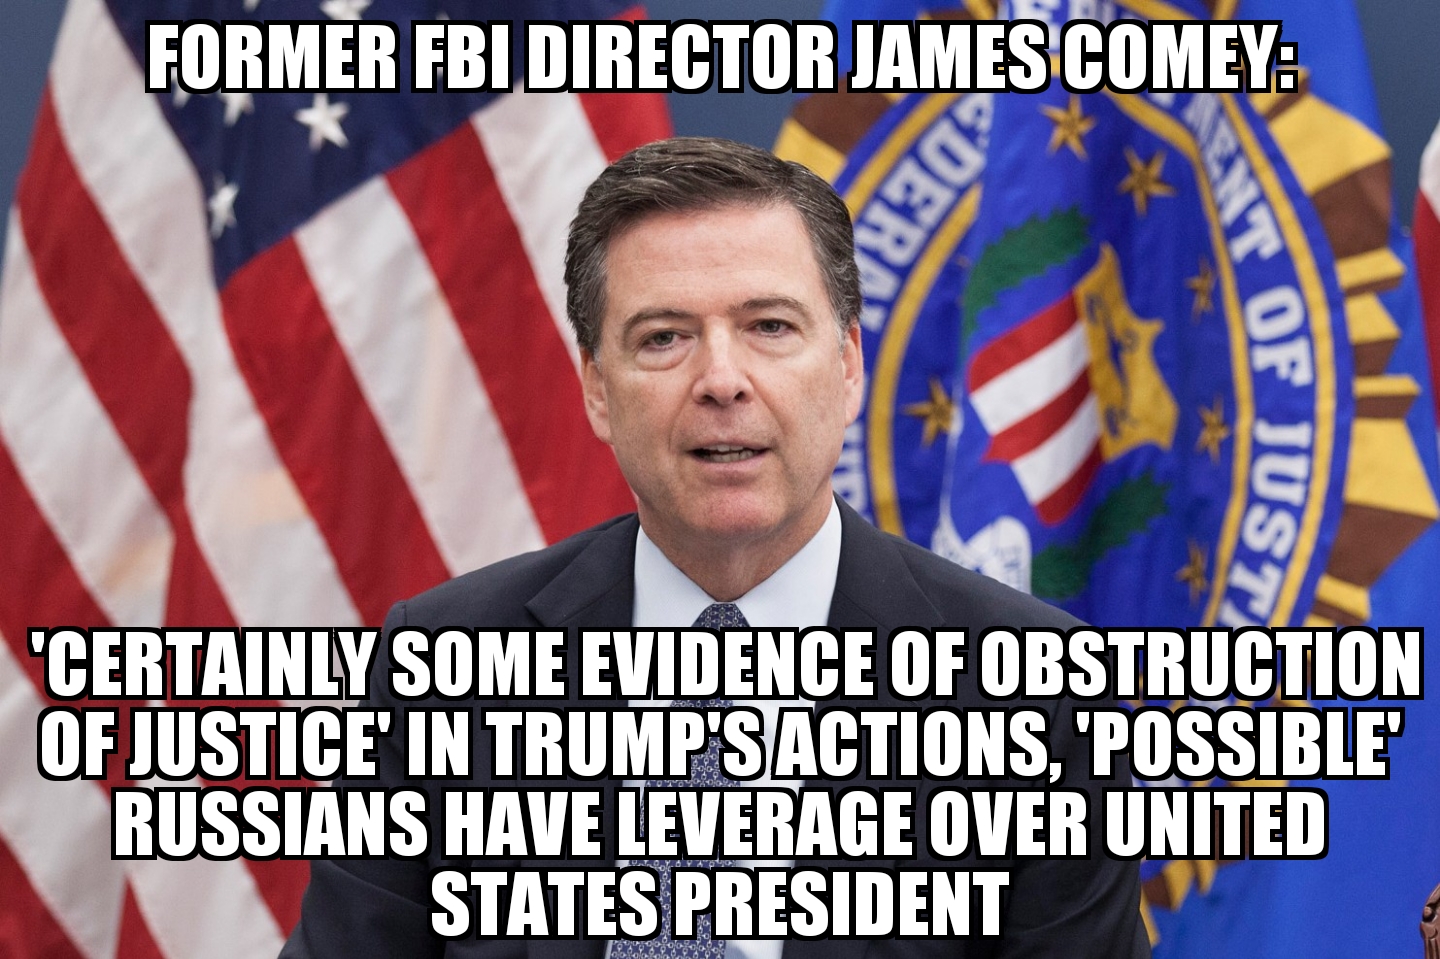 Comey gives first interview